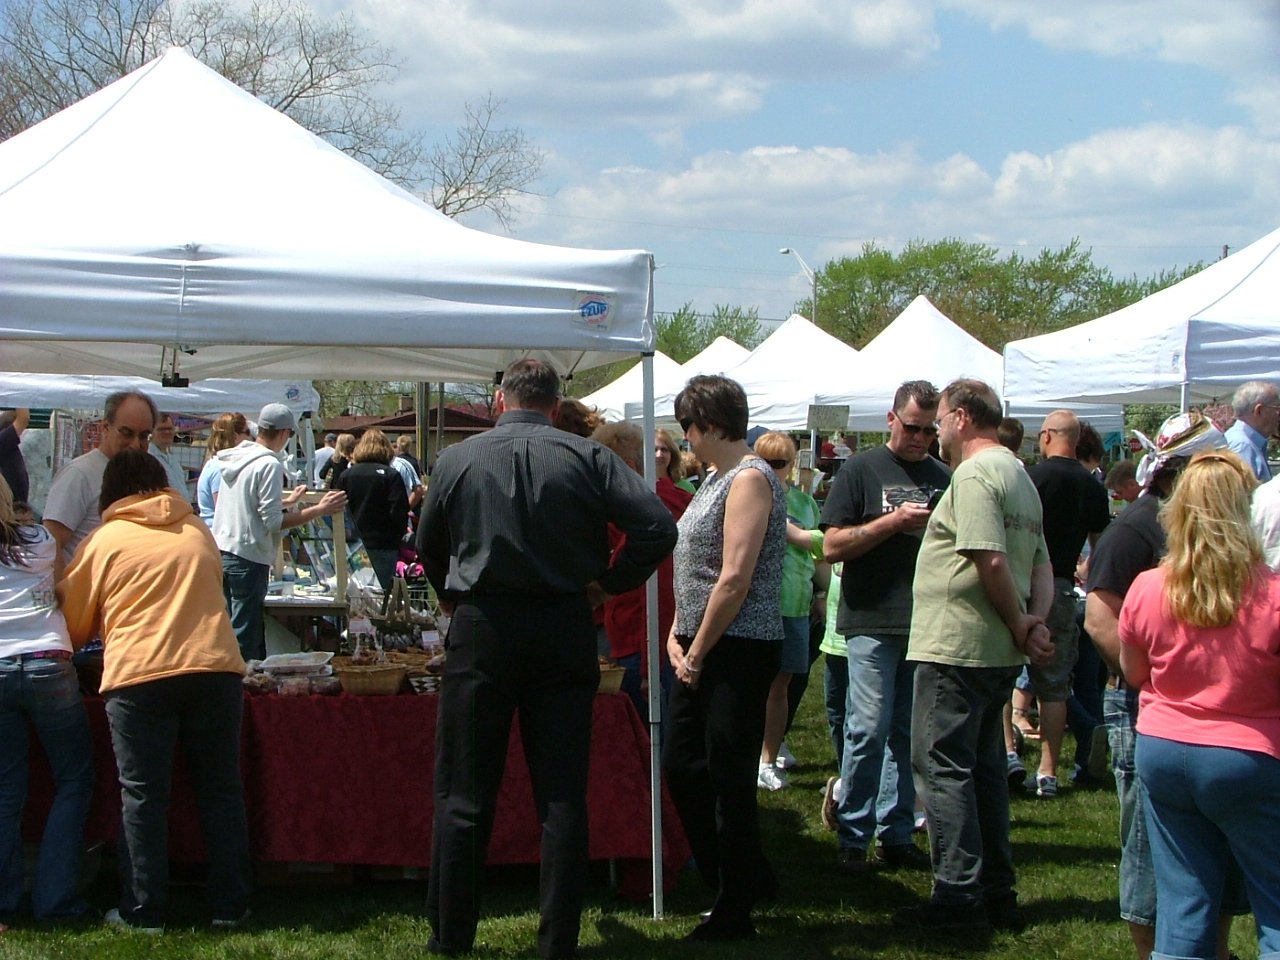 Munster Holiday Arts and Crafts Fair